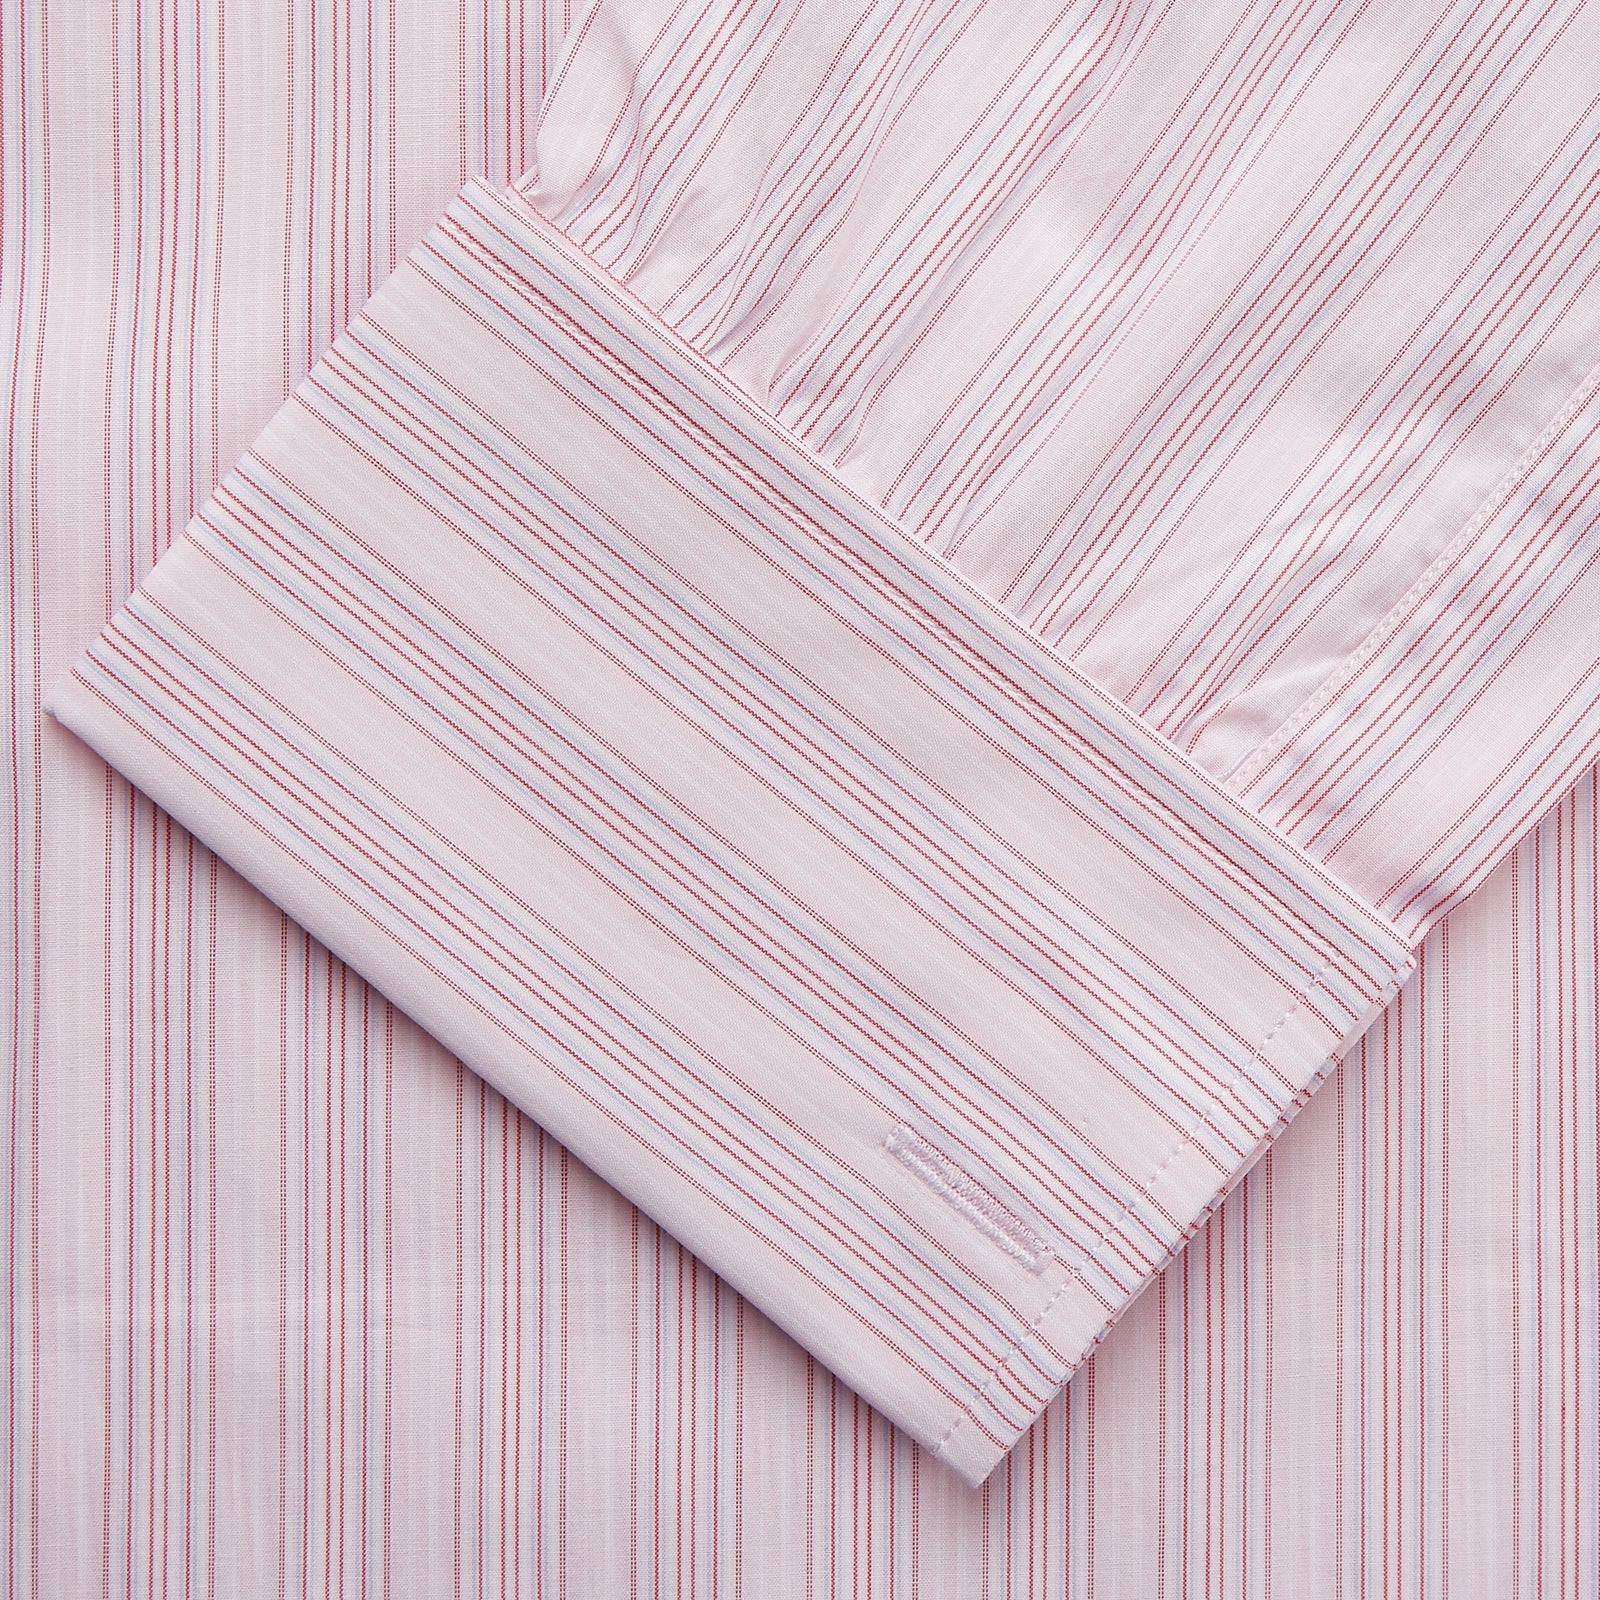 Pink and Peach Multi Stripe Cotton Regular Fit Whitby Shirt